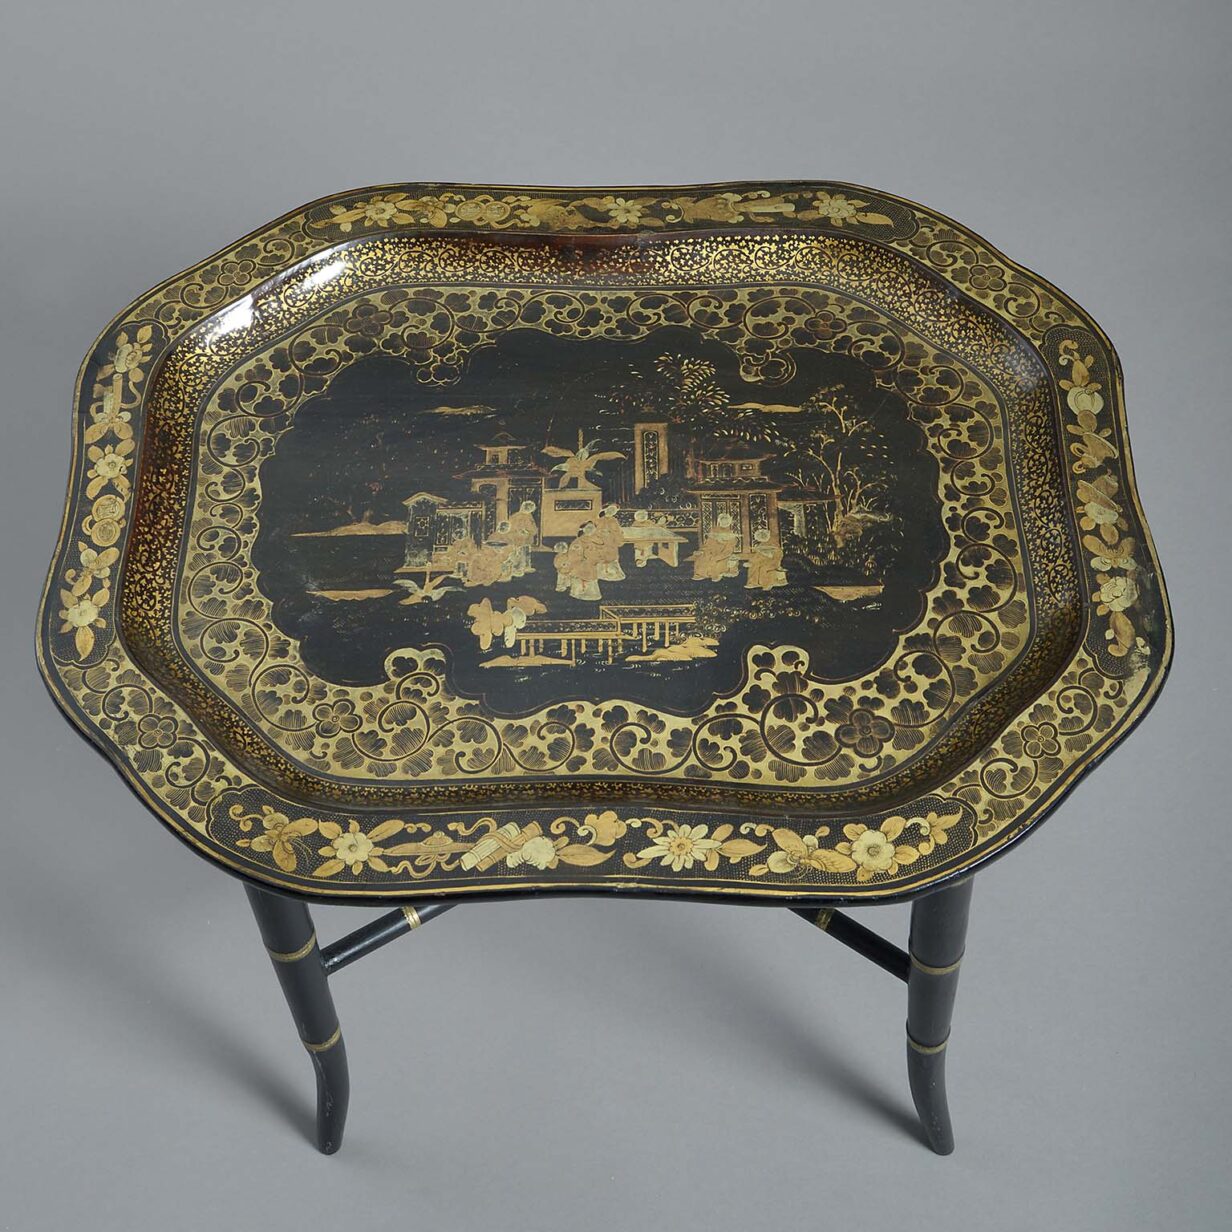 Early 19th century black japanned tray table